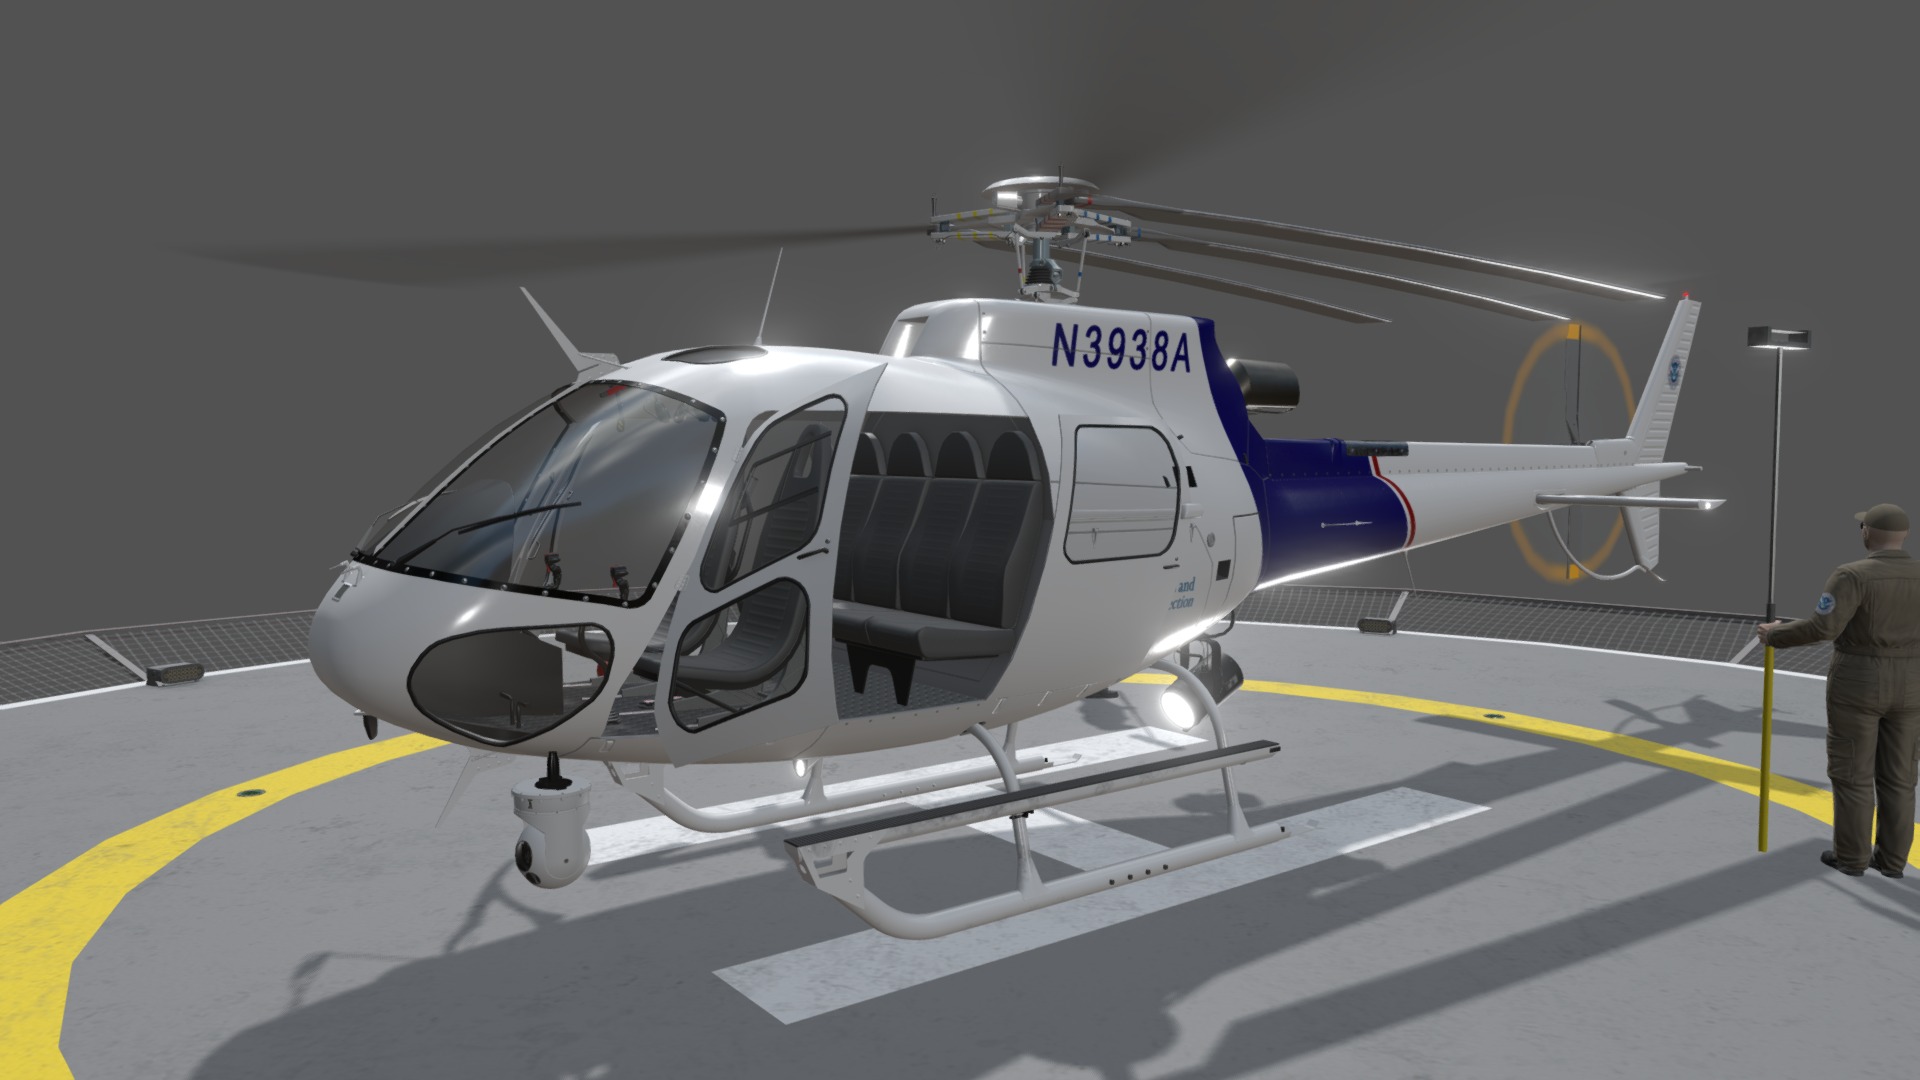 3D model AS-350 U.S. CBP Animated - This is a 3D model of the AS-350 U.S. CBP Animated. The 3D model is about a helicopter on a runway.